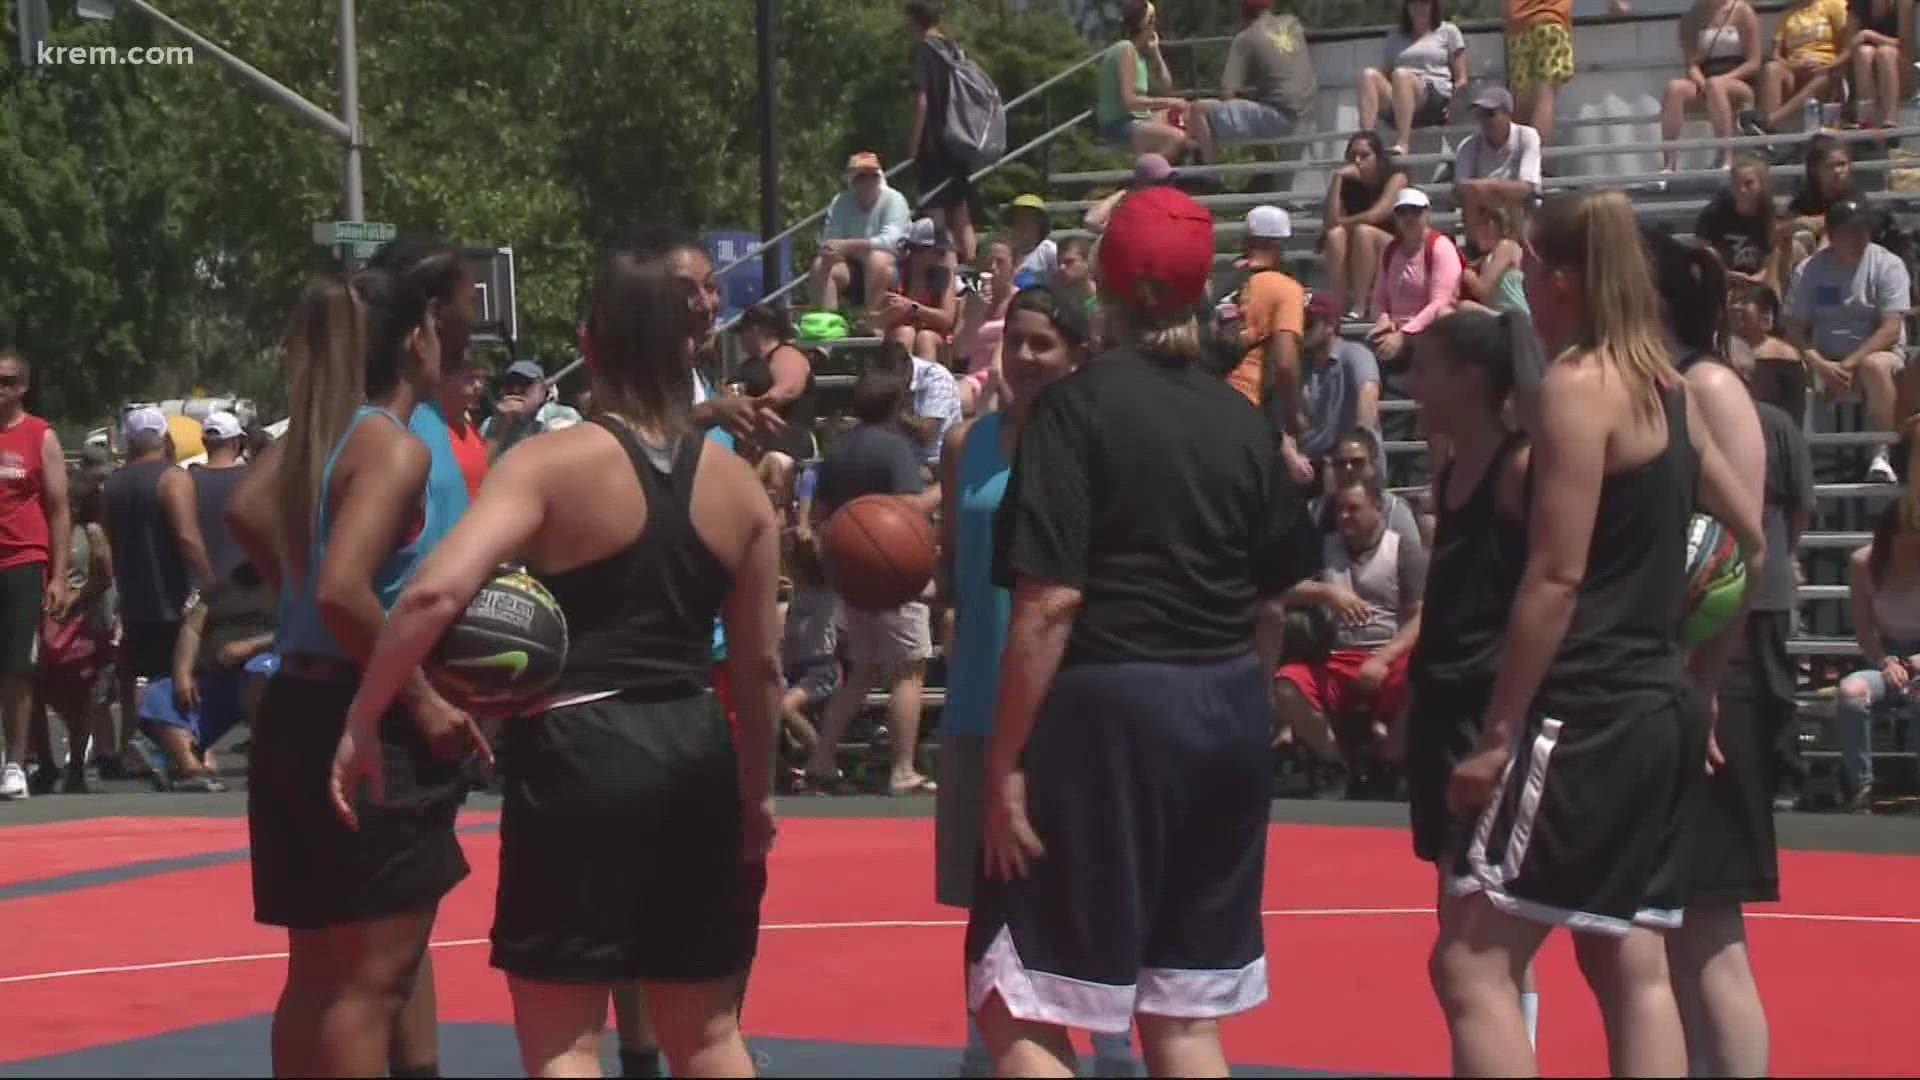 Teams have a few extra days to register for Spokane's 3-on-3 basketball tournament.